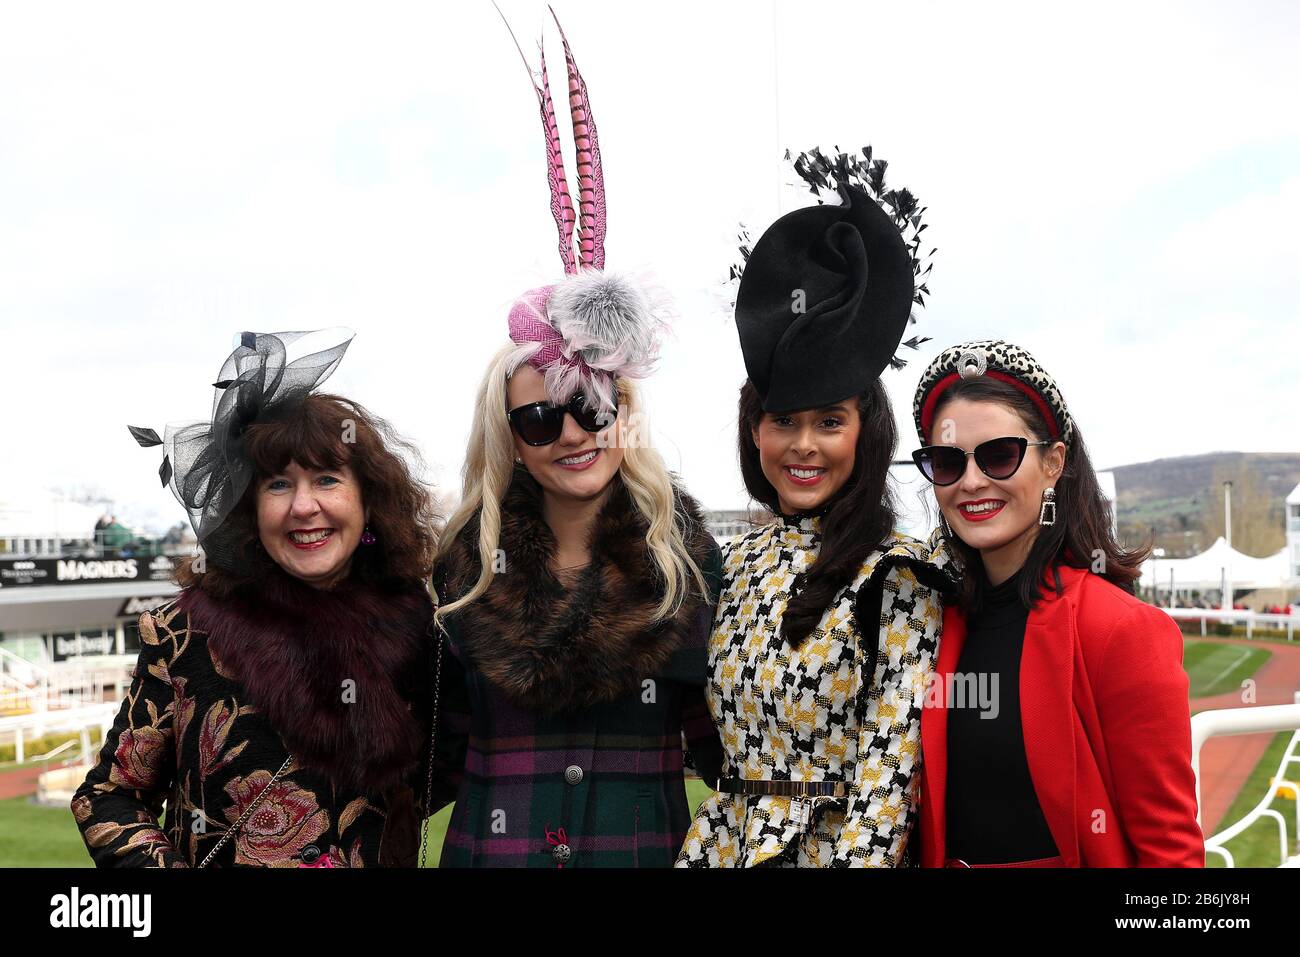 Sonia Smith, Sophie Lydia-Perkins, Charlotte Blenkinsopp and Amy Brown during day two of the Cheltenham Festival at Cheltenham Racecourse. Stock Photo